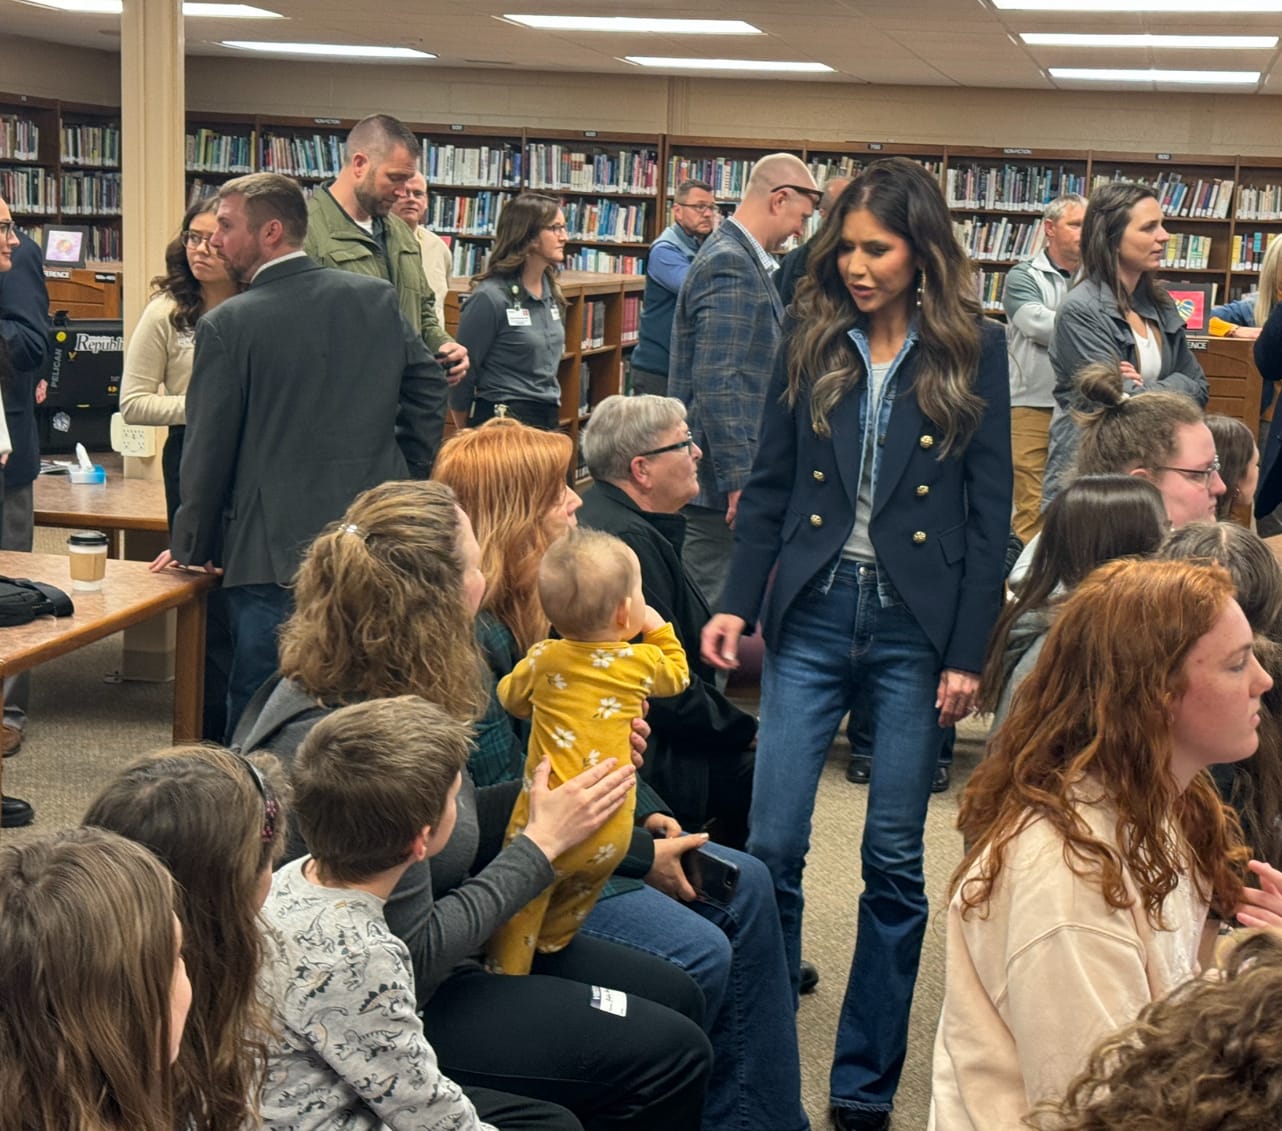 South Dakota Gov. Kristi Noem speaks with constituents at a library